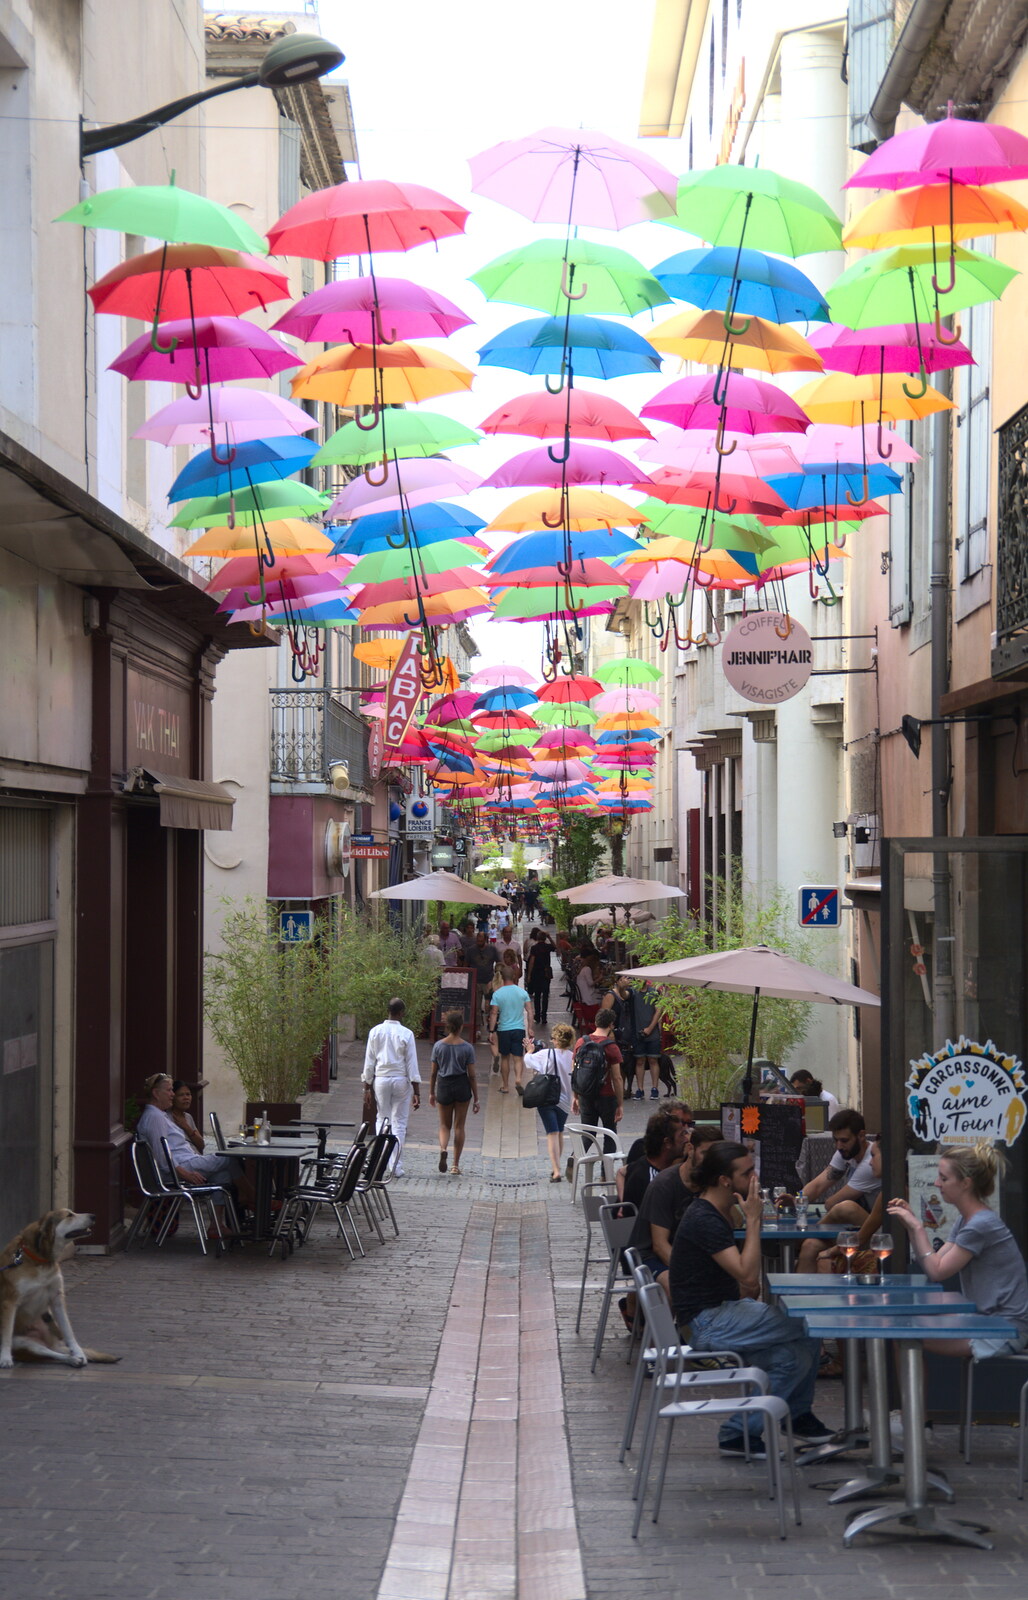 There's a display featuring hundreds of umbrellas from A Trip to Carcassonne, Aude, France - 8th August 2018